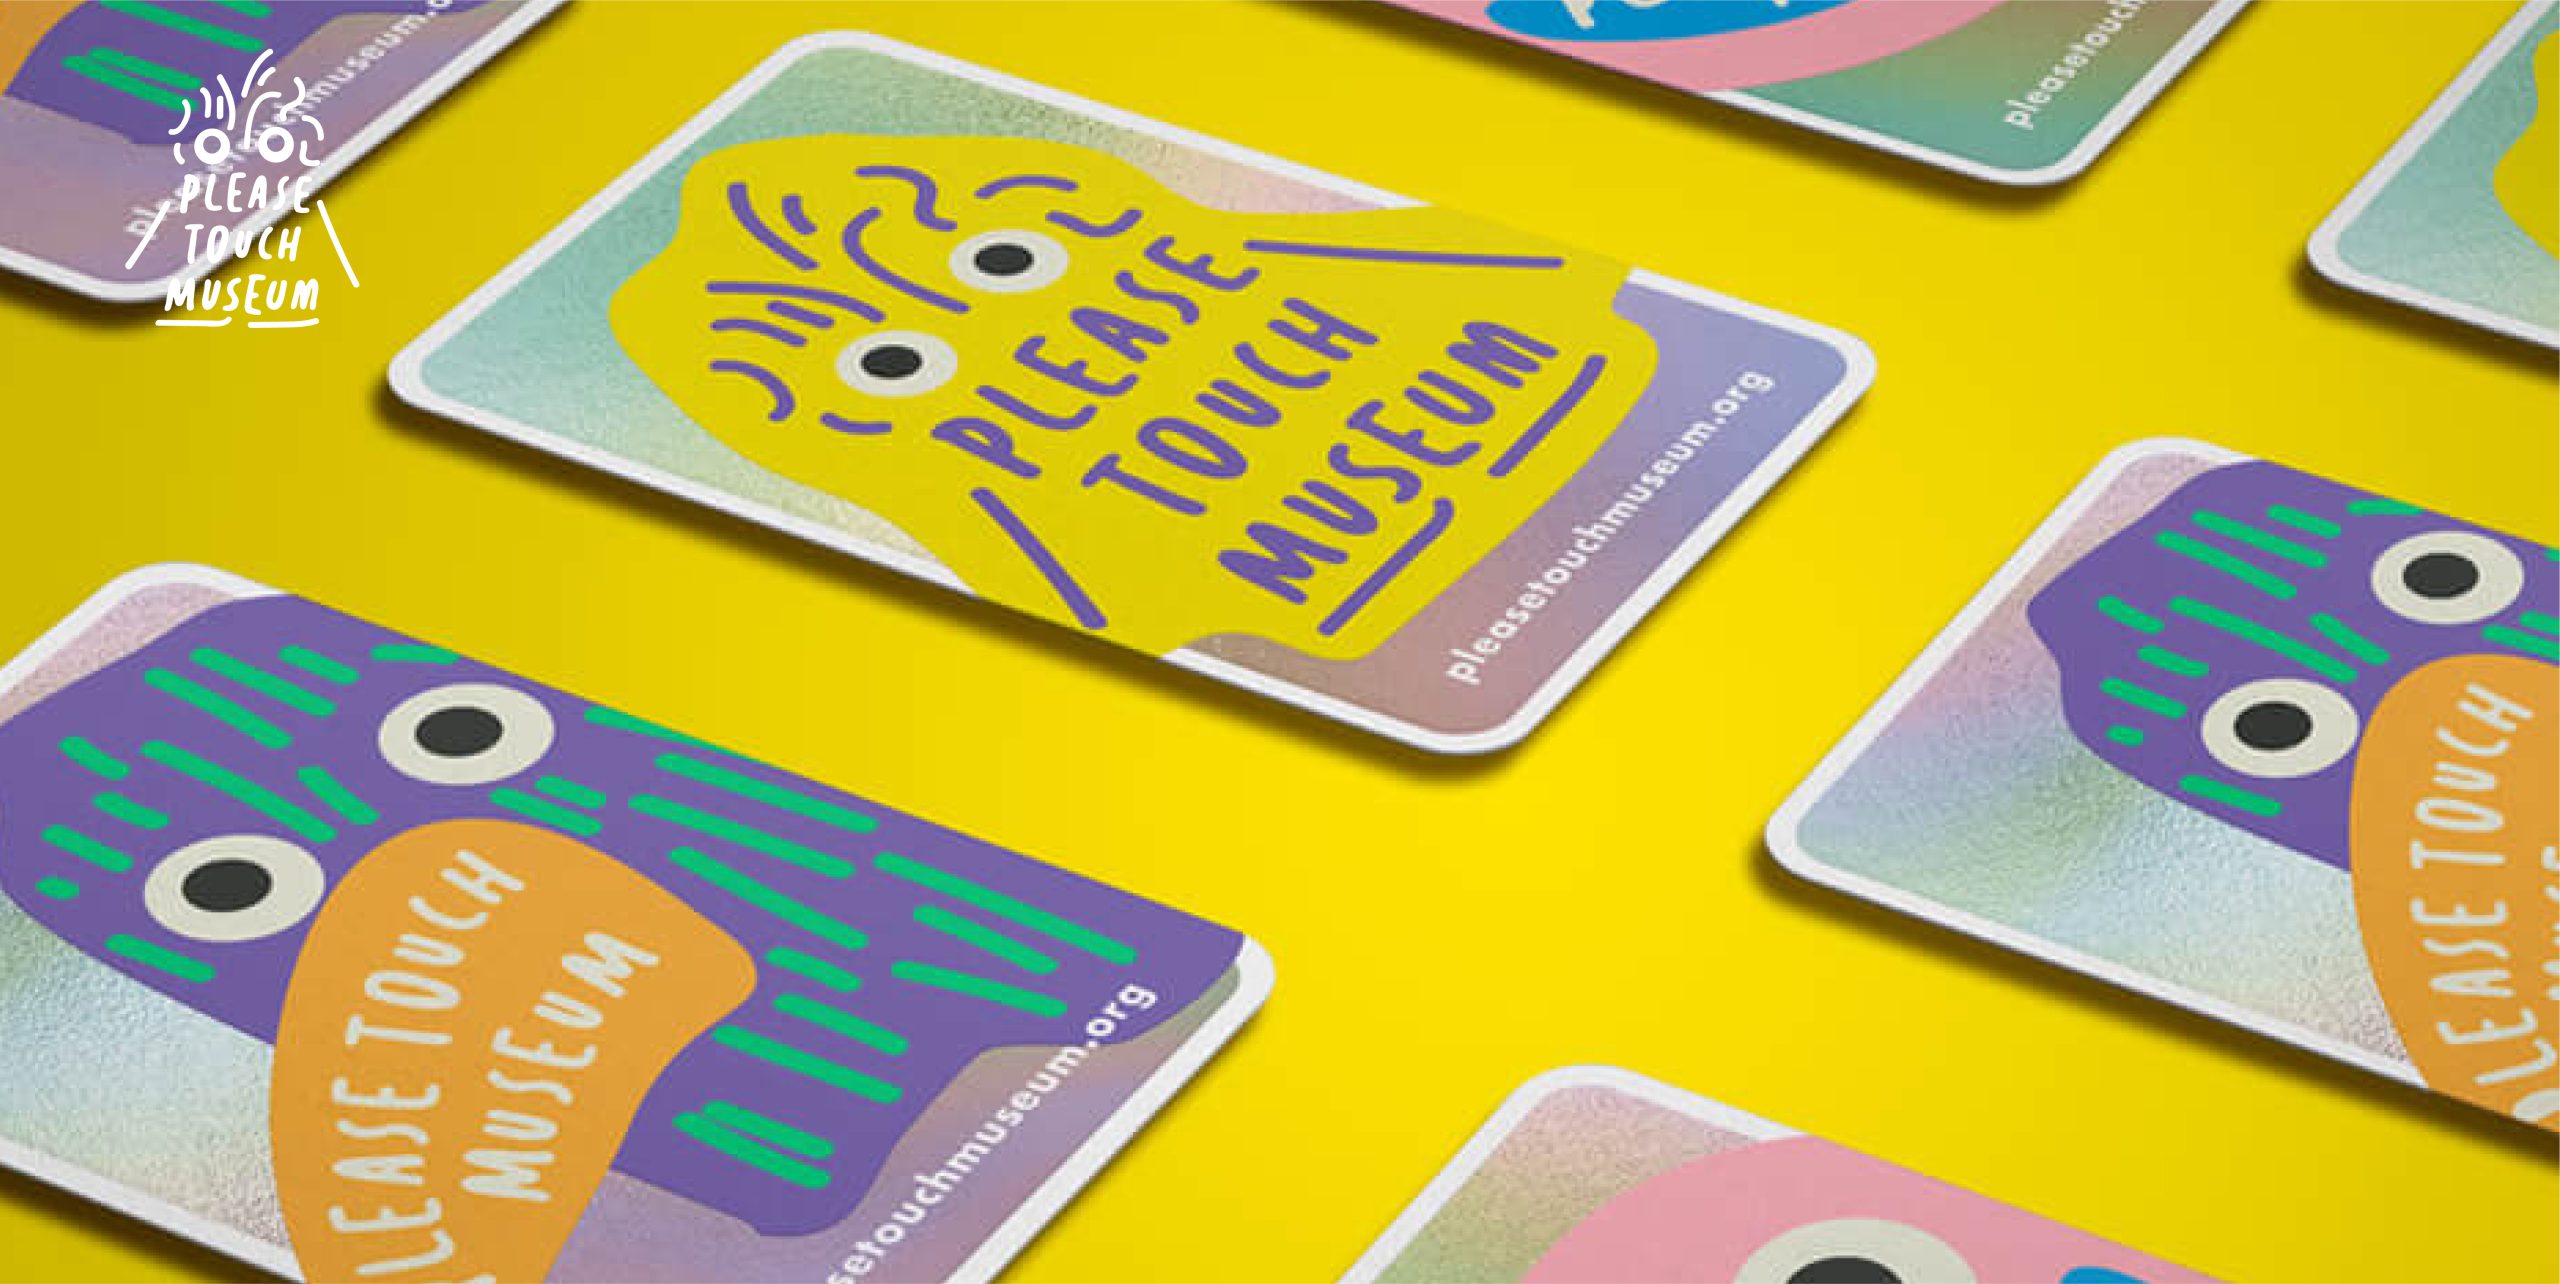 Close up of playful and bright new Please Touch Museum branding